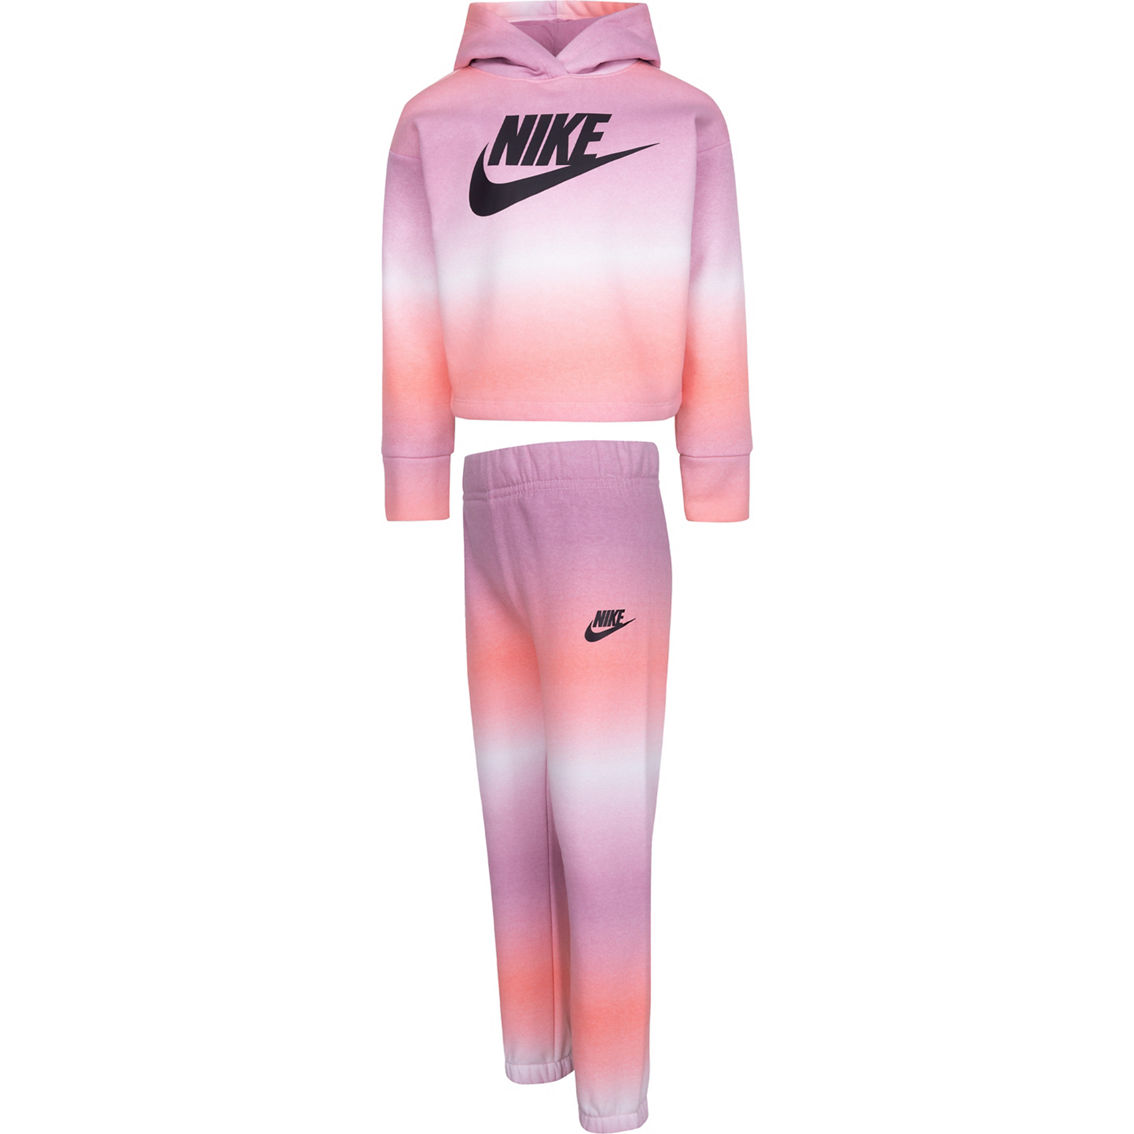 Nike Little Girls Printed Club Joggers 2 pc. Set - Image 1 of 3